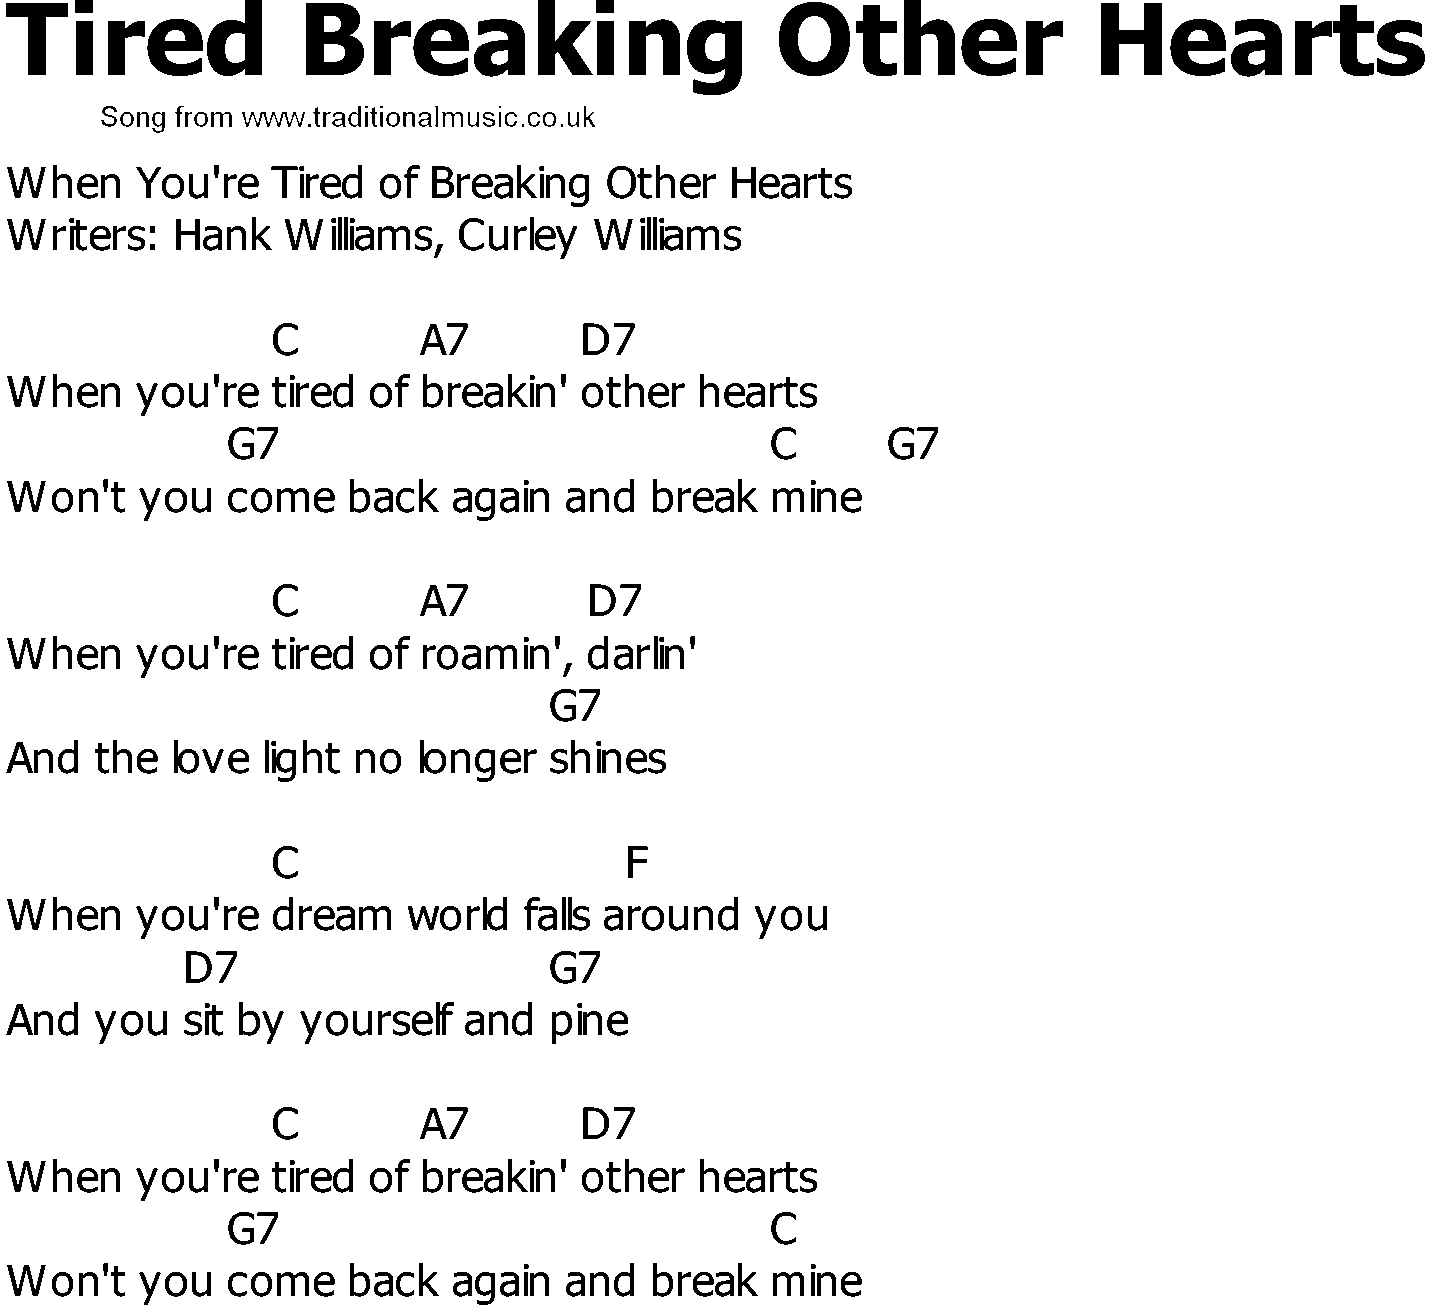 Old Country song lyrics with chords - Tired Breaking Other Hearts